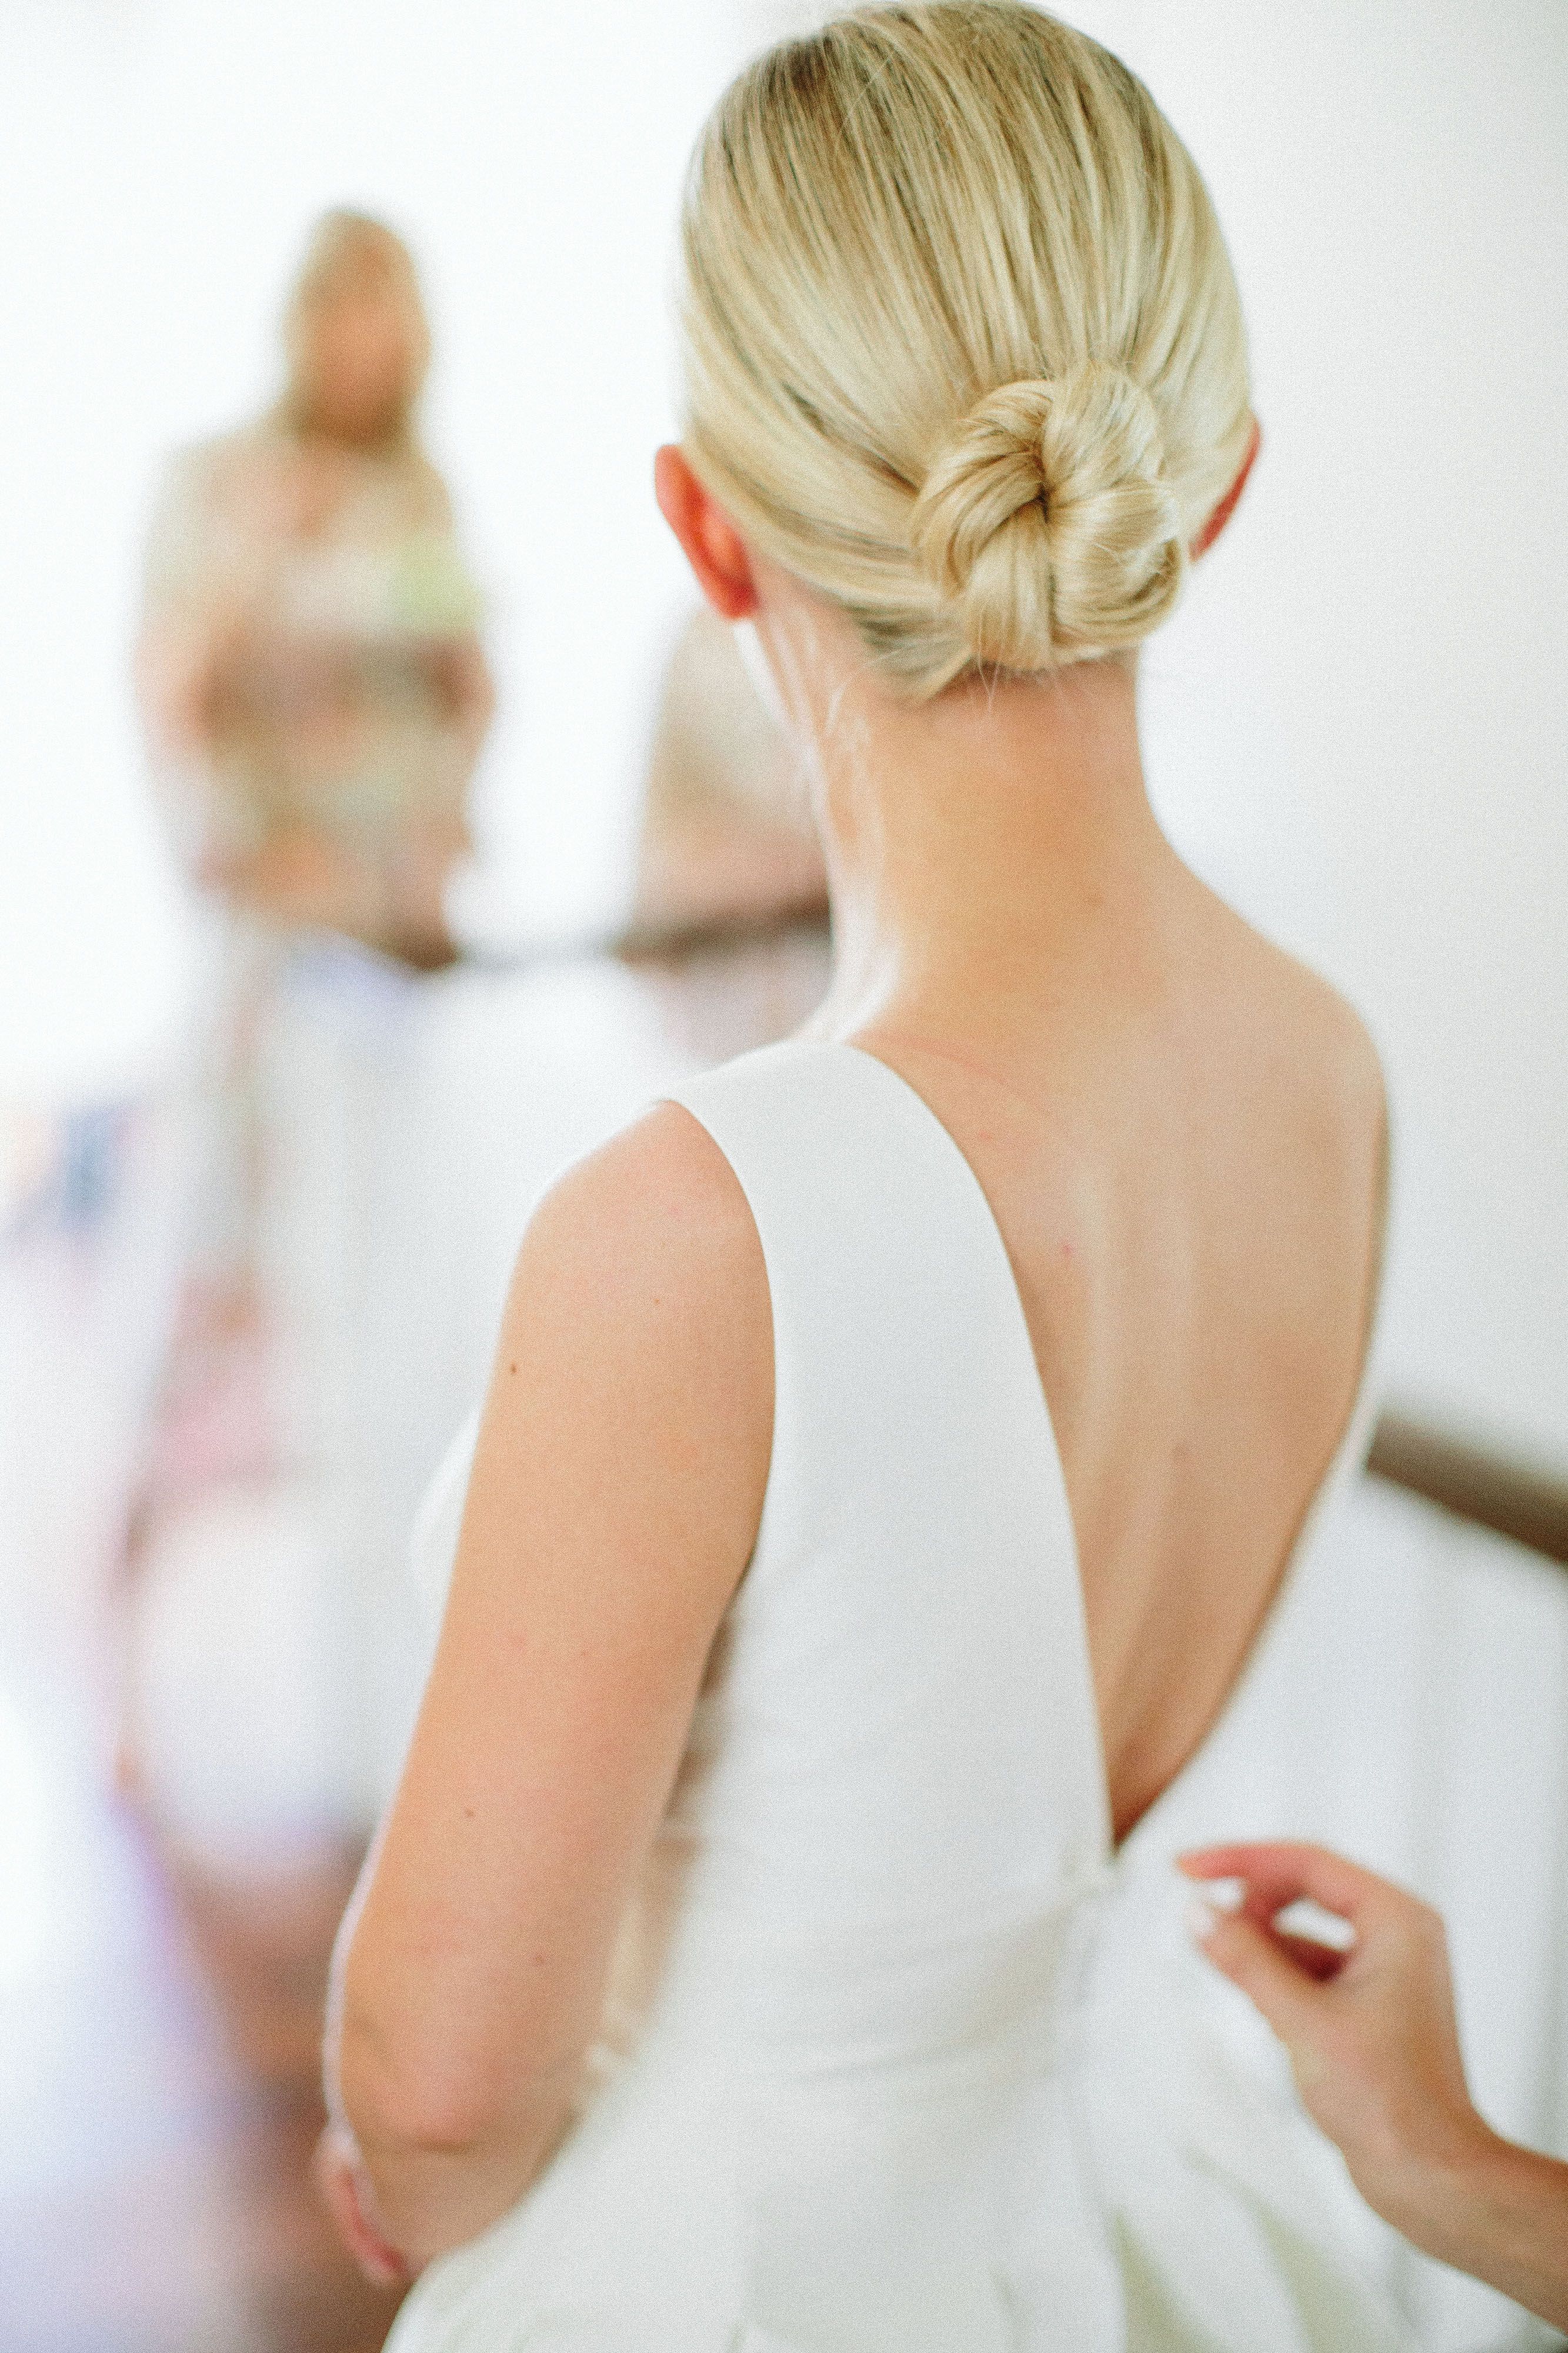 55 Simple Wedding Hairstyles That Prove Less Is More -   16 hairstyles Simple low chignon ideas